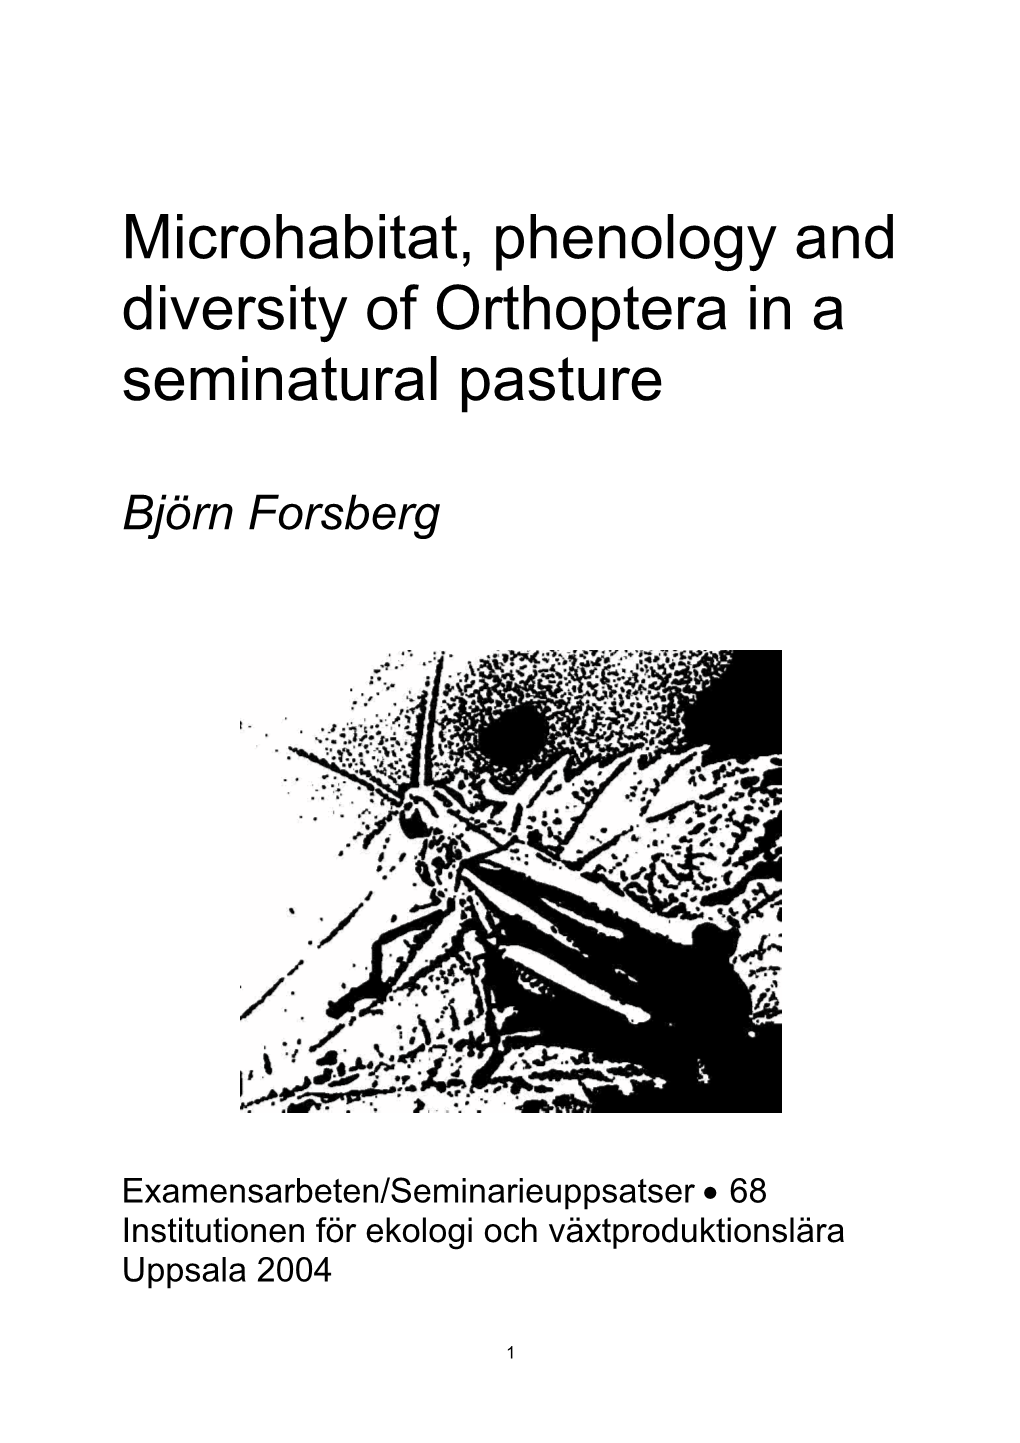 Microhabitat, Phenology and Diversity of Orthoptera in a Seminatural Pasture